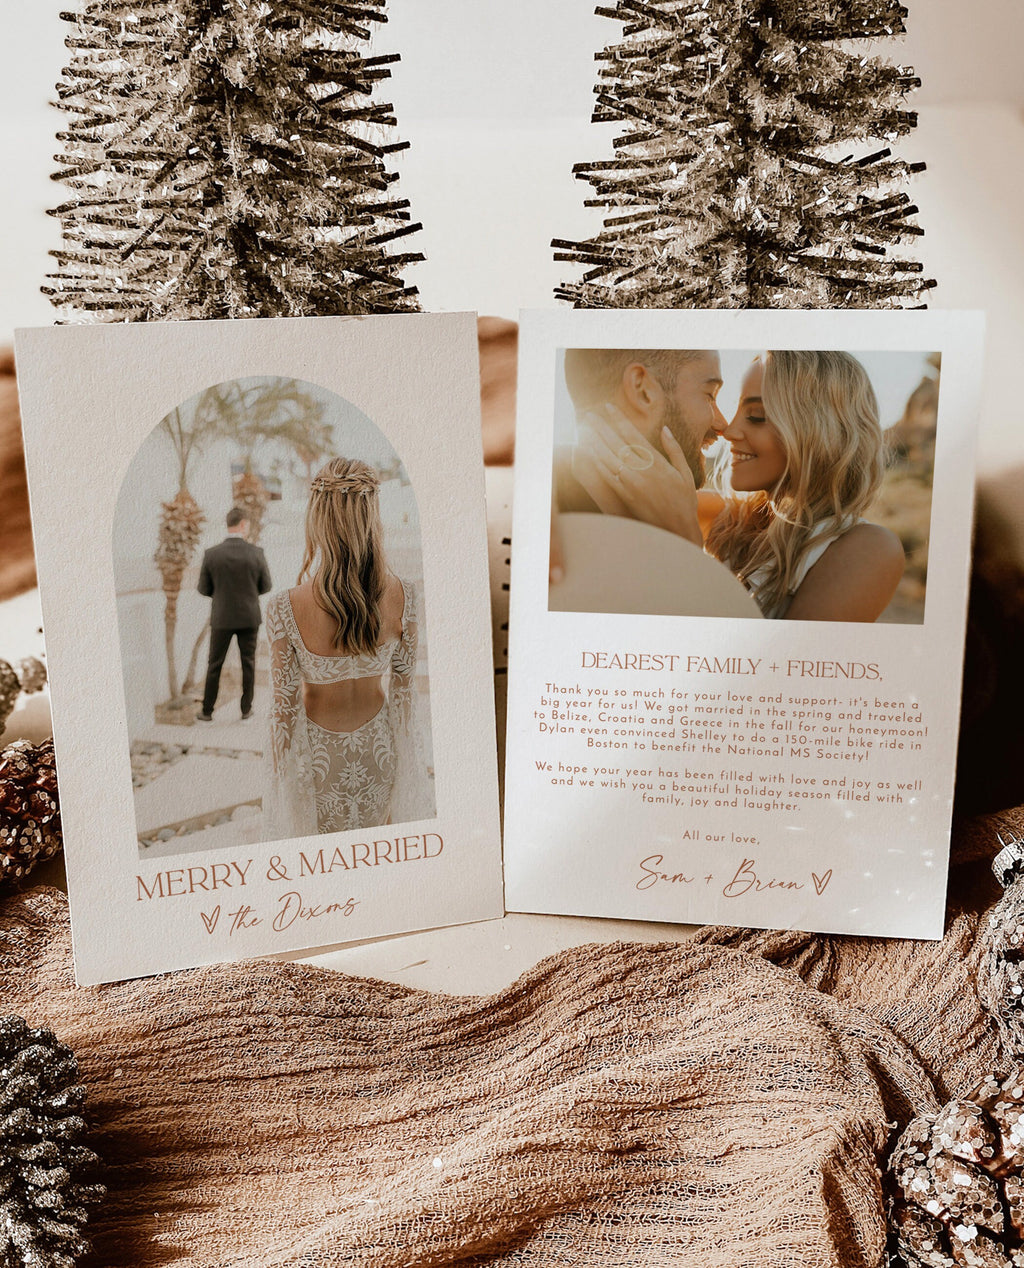 Married and Bright Christmas Card  Minimalist Christmas Photo Card – Wild  Bloom Design Studio